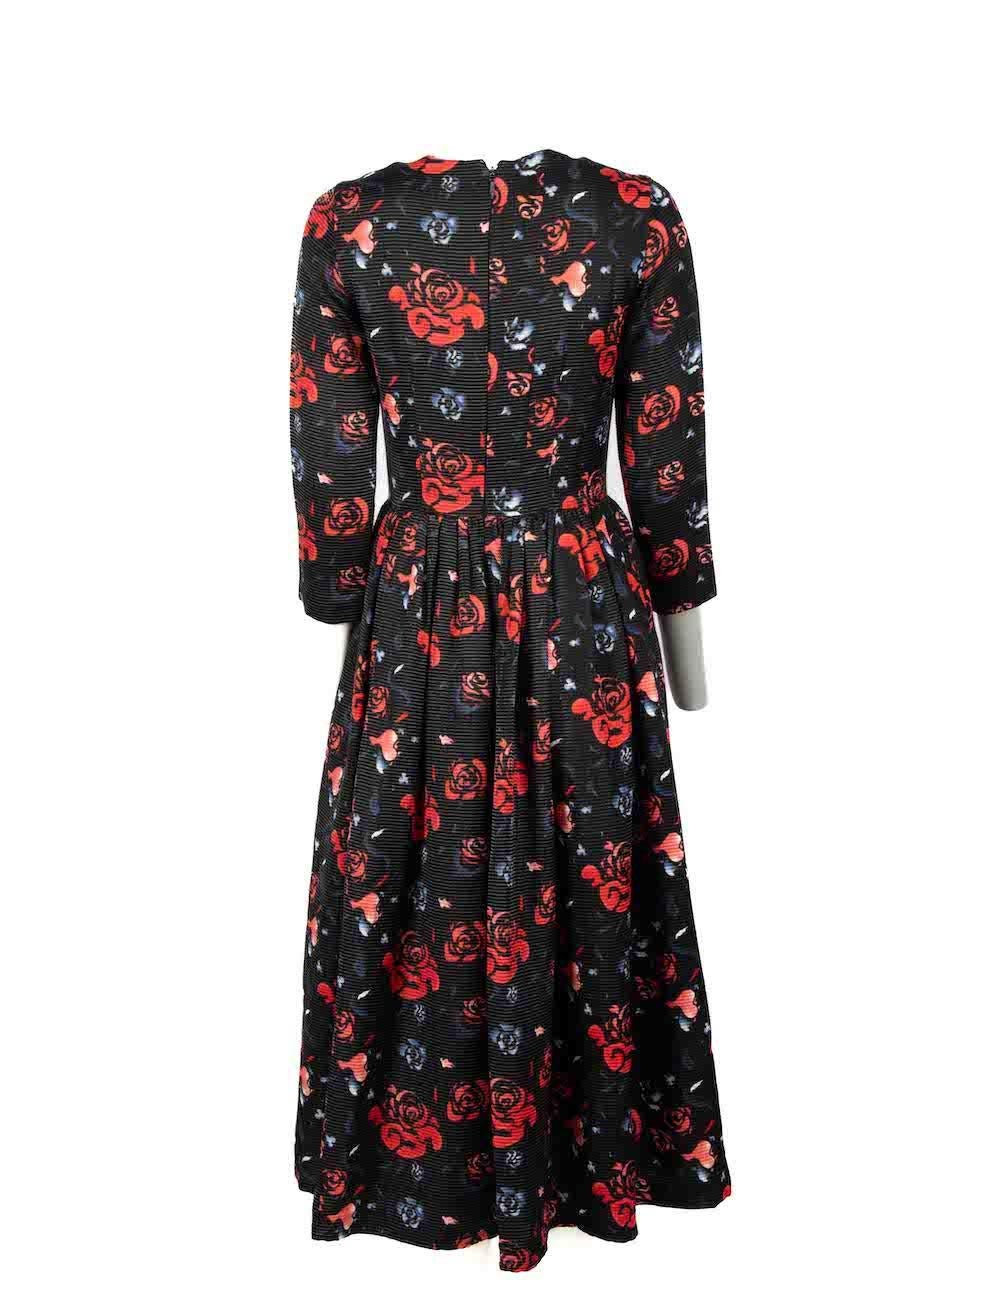 MSGM Black Textured Flower Print Midi Dress Size S In Good Condition For Sale In London, GB